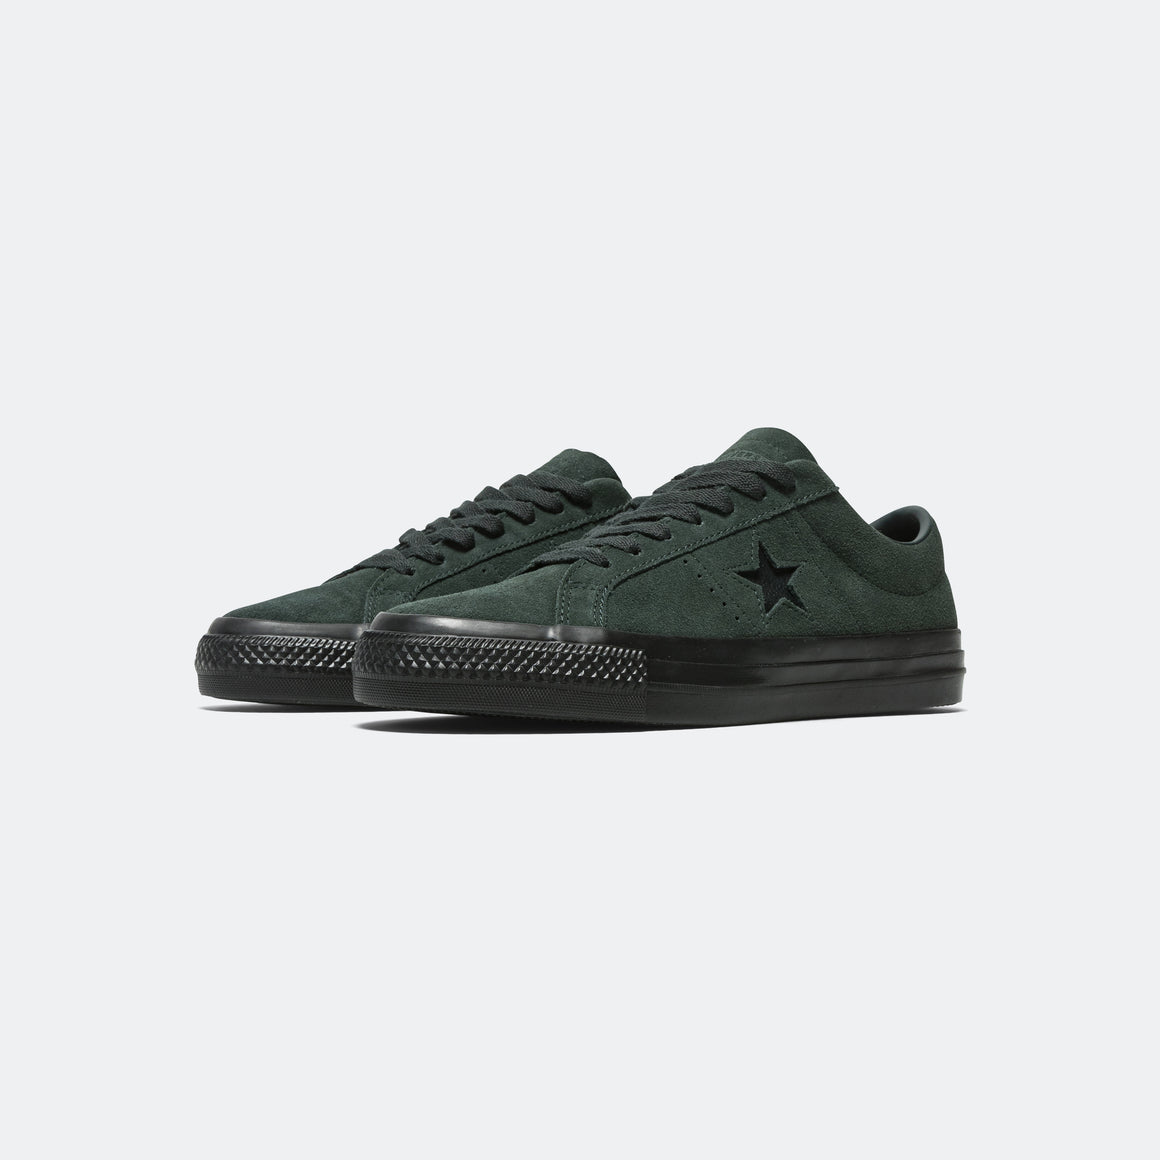 Converse - One Star Pro Suede - Secret Pine/Black - UP THERE